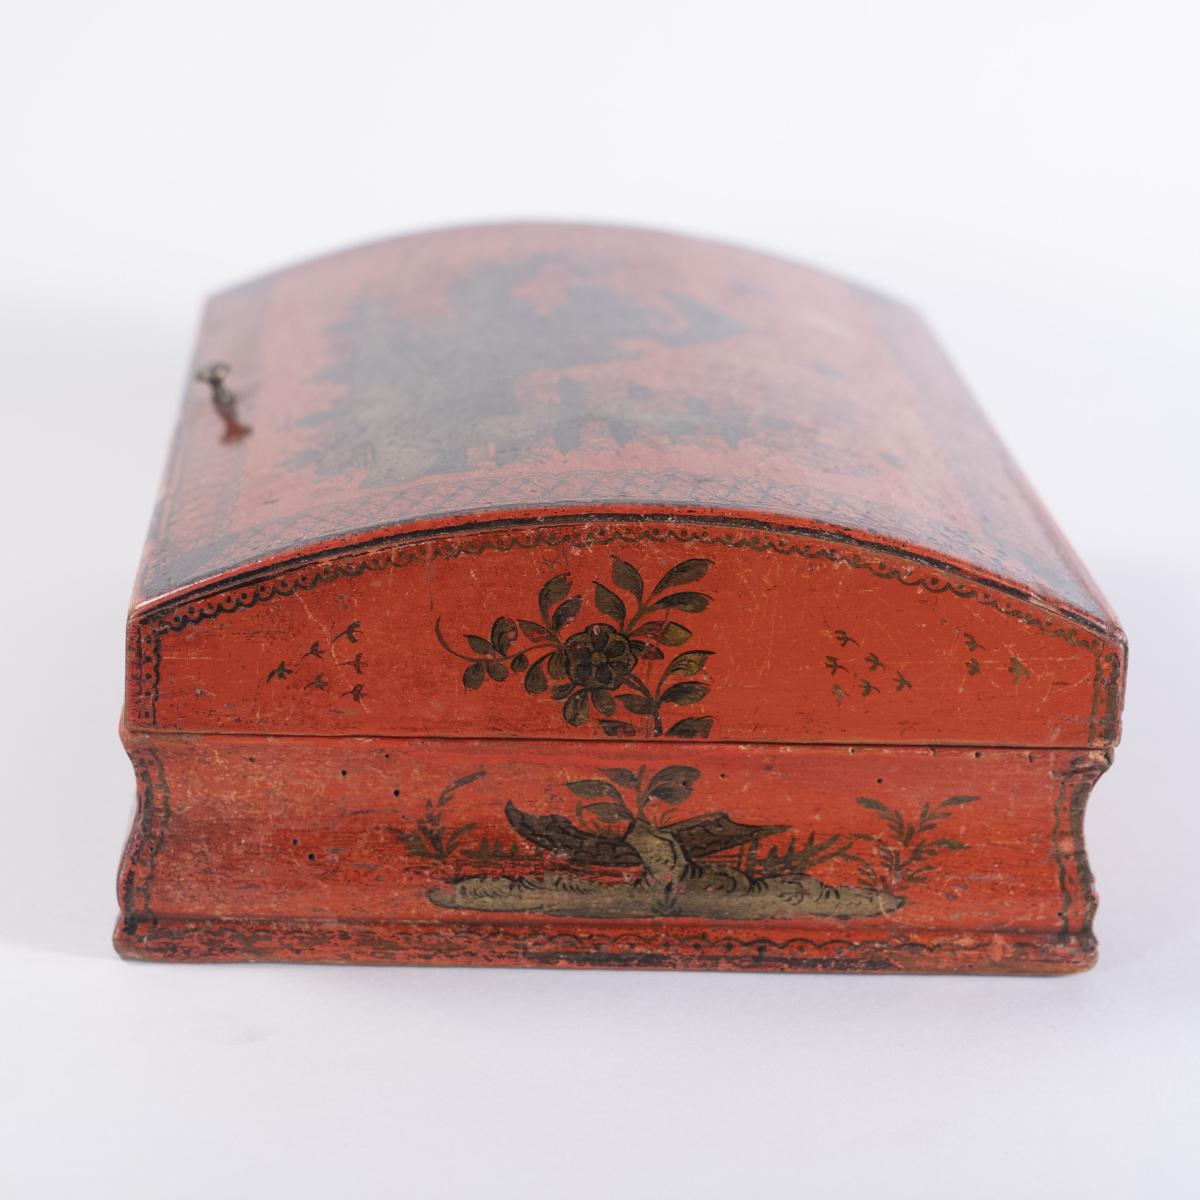 An early 18 century red lacquered bath box circa 1720 to 1750